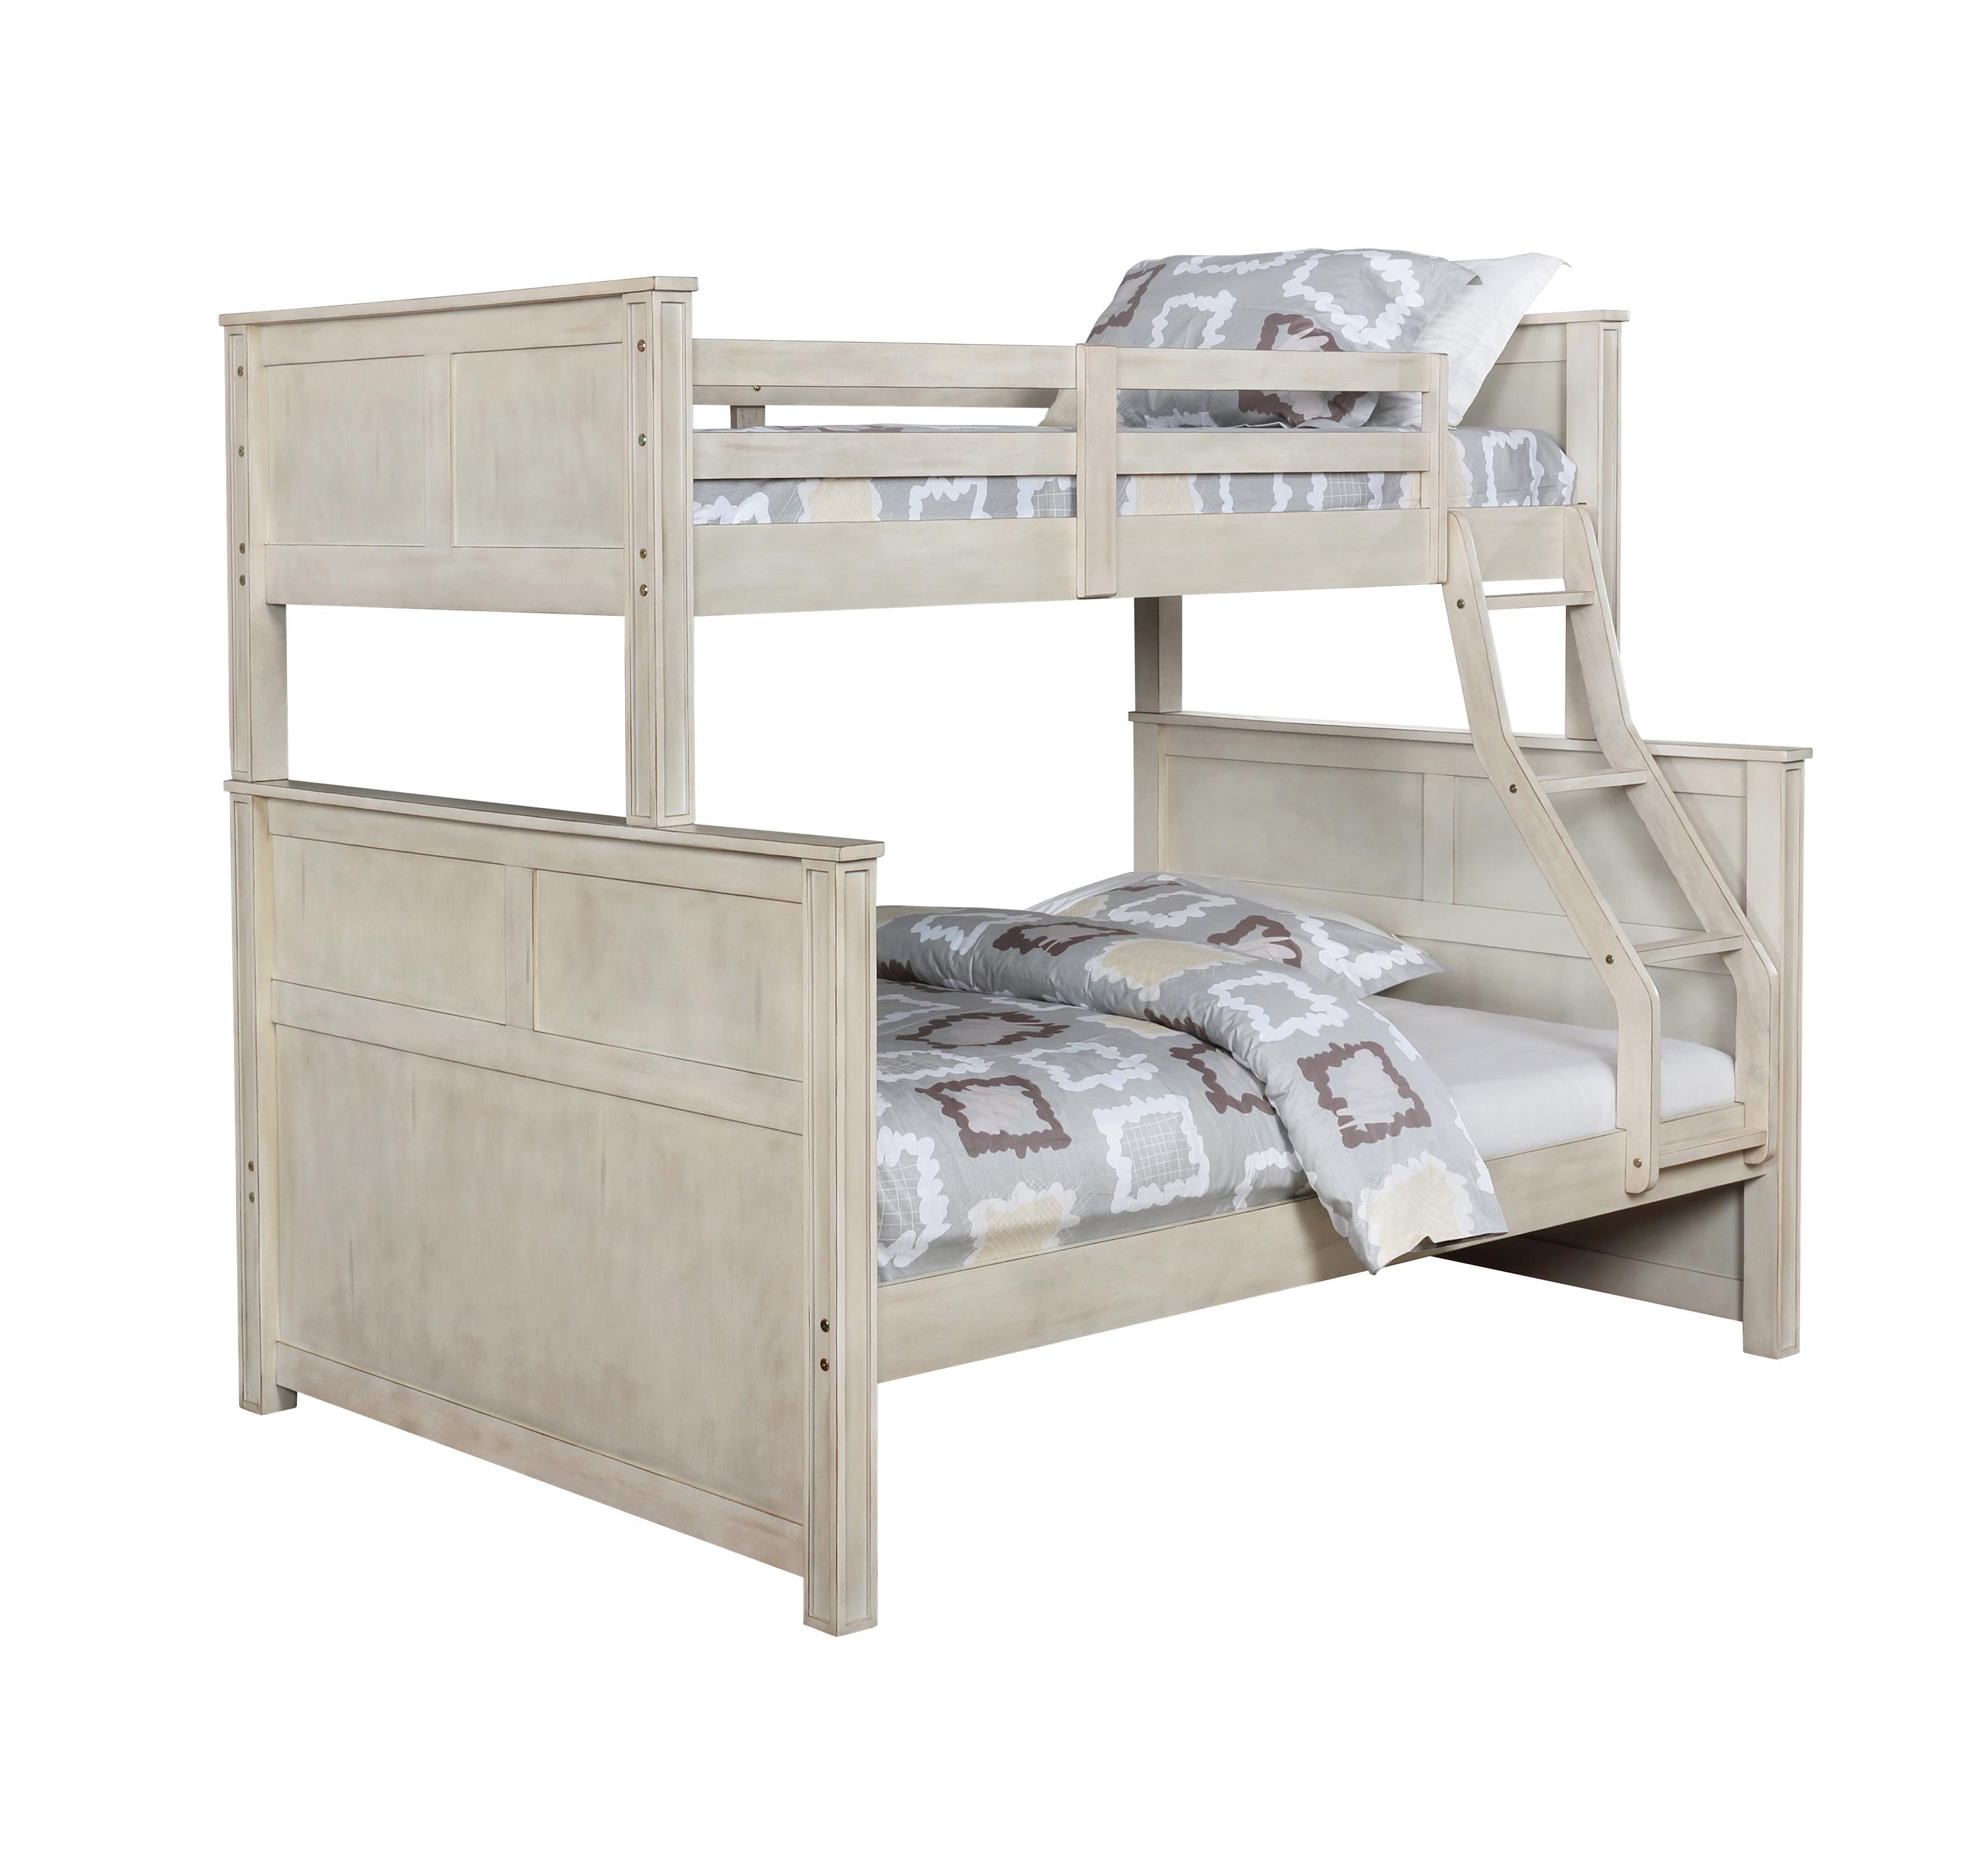 Modern Bunk Bed 461252 Montrose 461252 in Antique White 